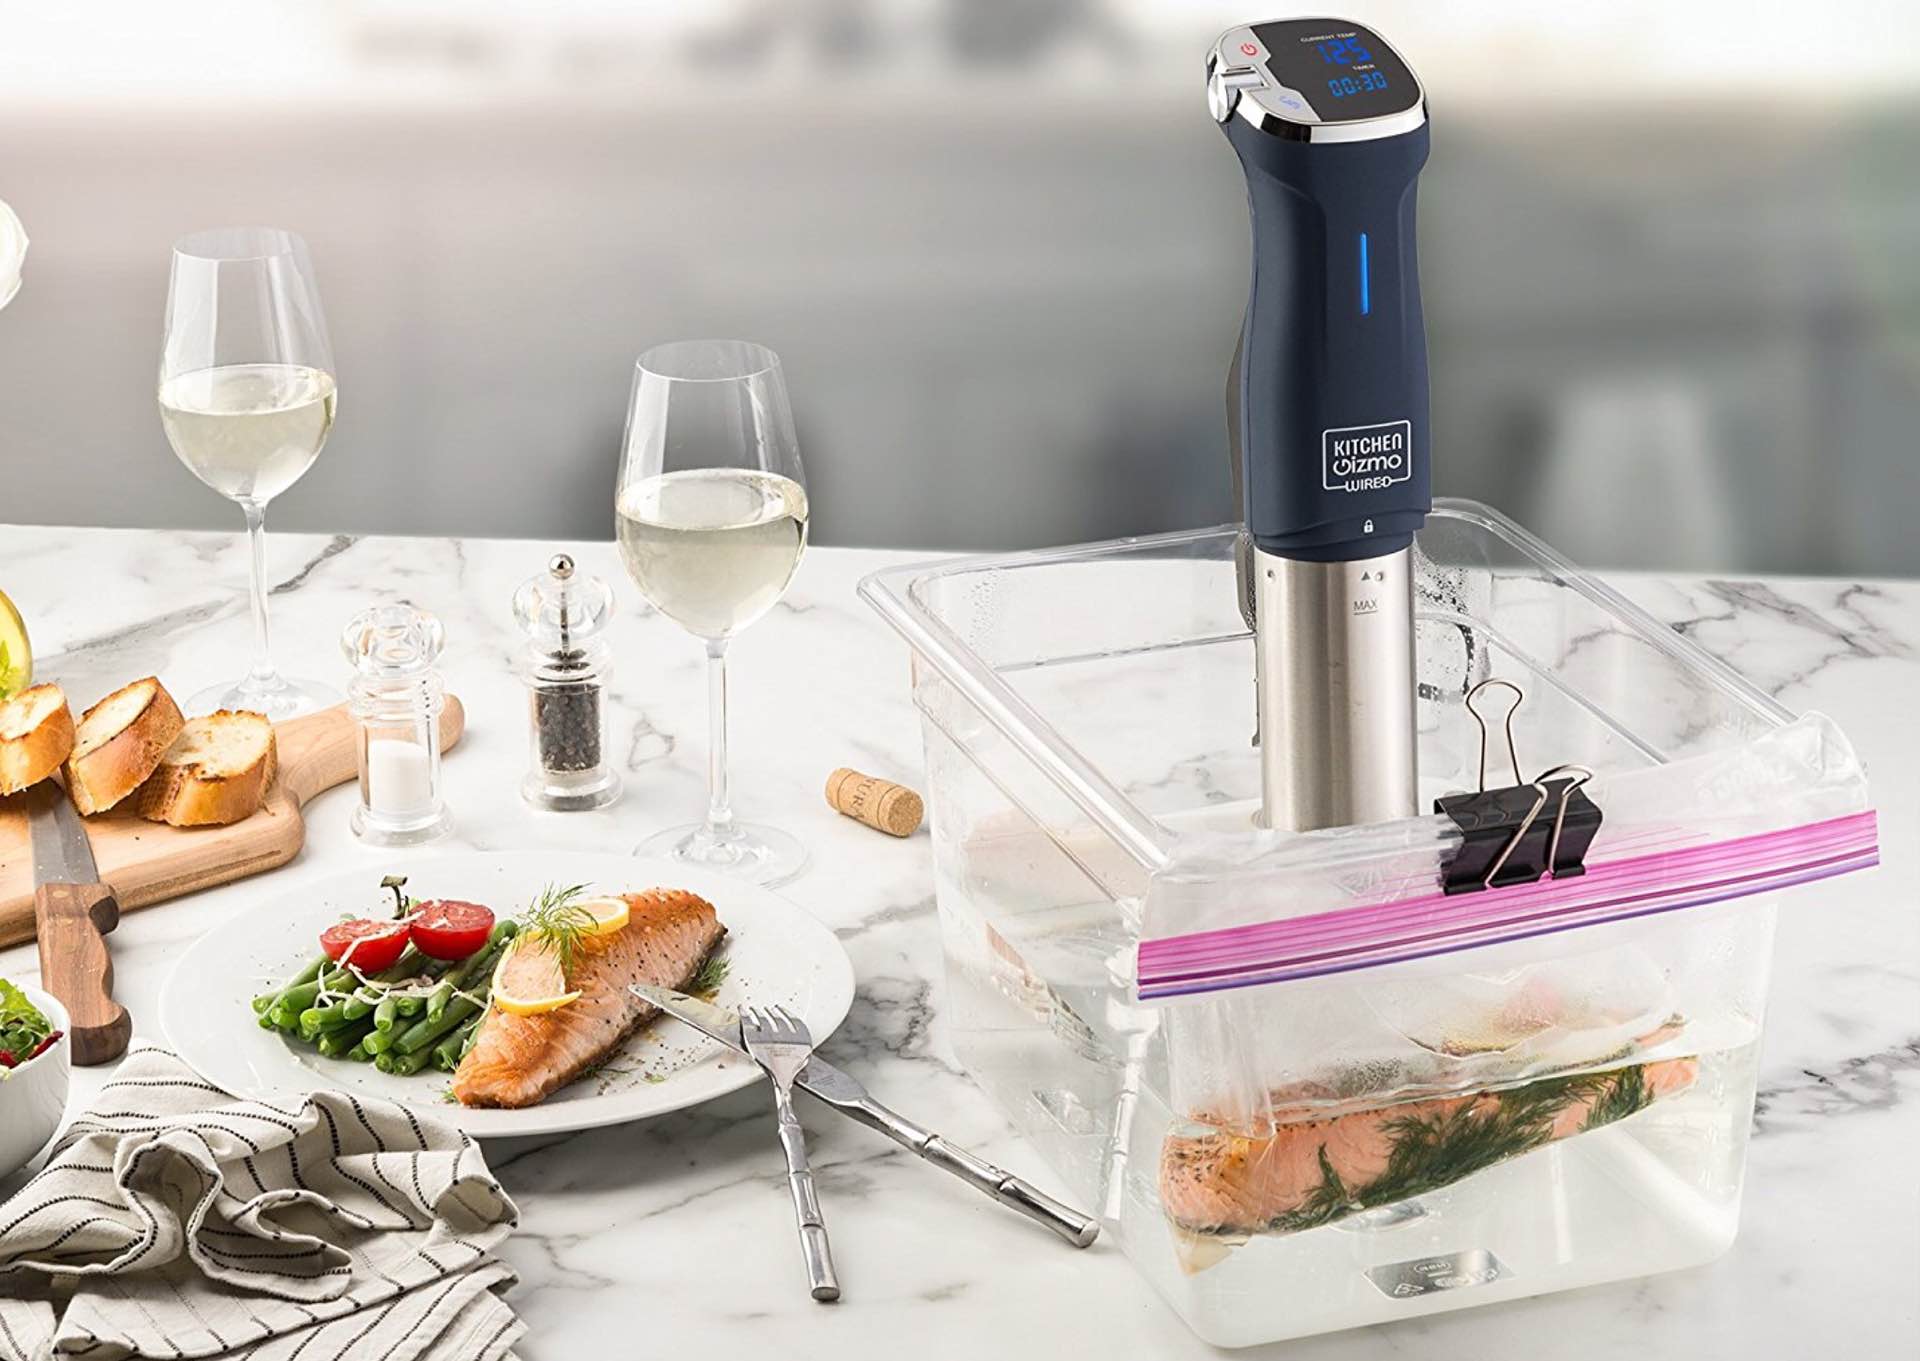 kitchen-gizmo-simplified-sous-vide-immersion-circulator